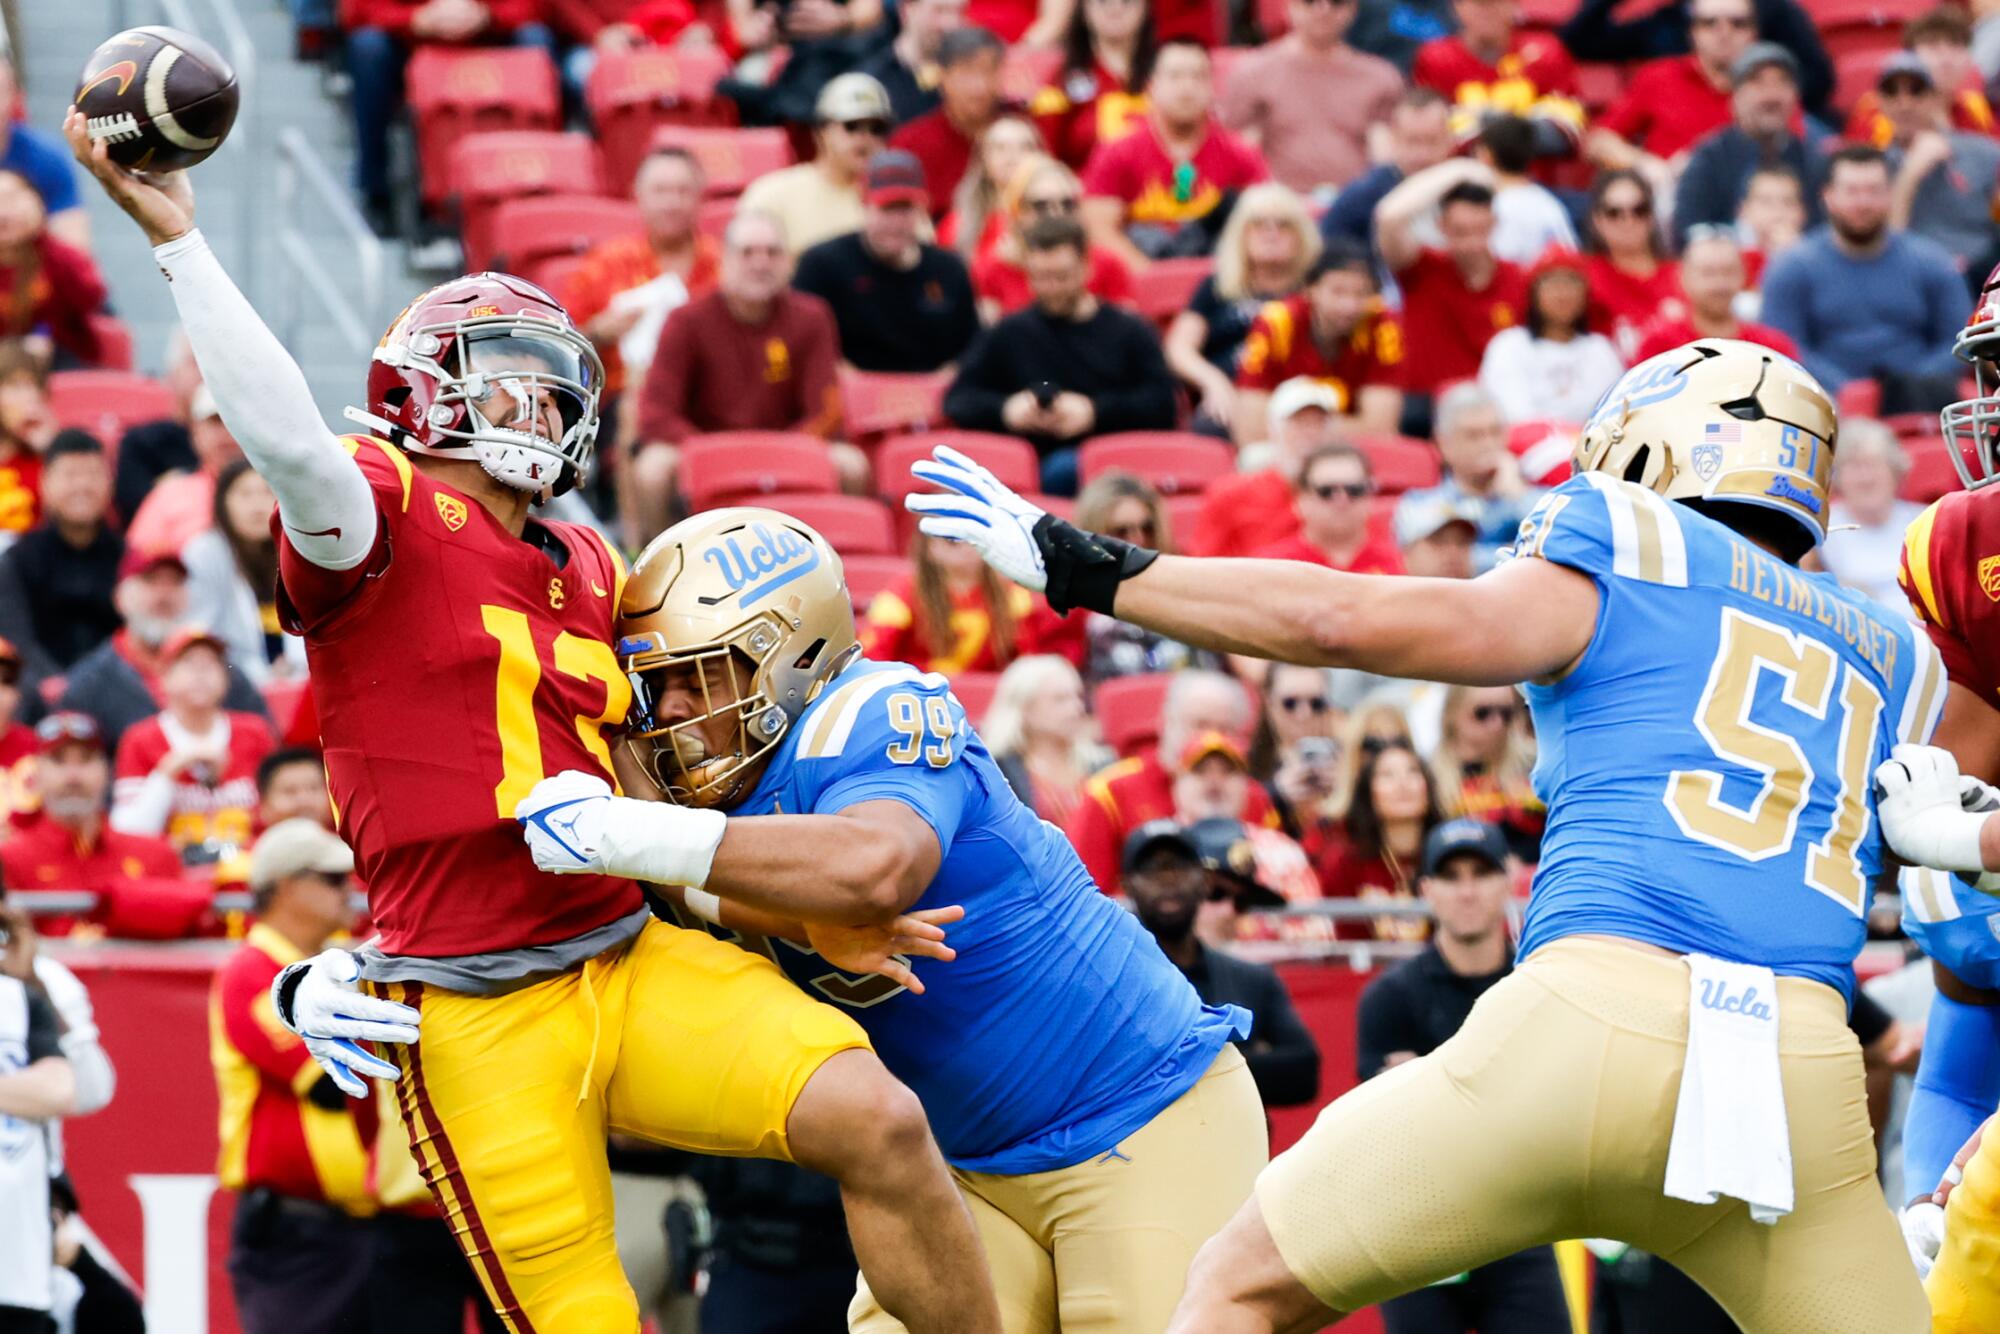 USC quarterback Caleb Williams throws a pass while getting tackled by UCLA defensive lineman Keanu Williams Saturday.